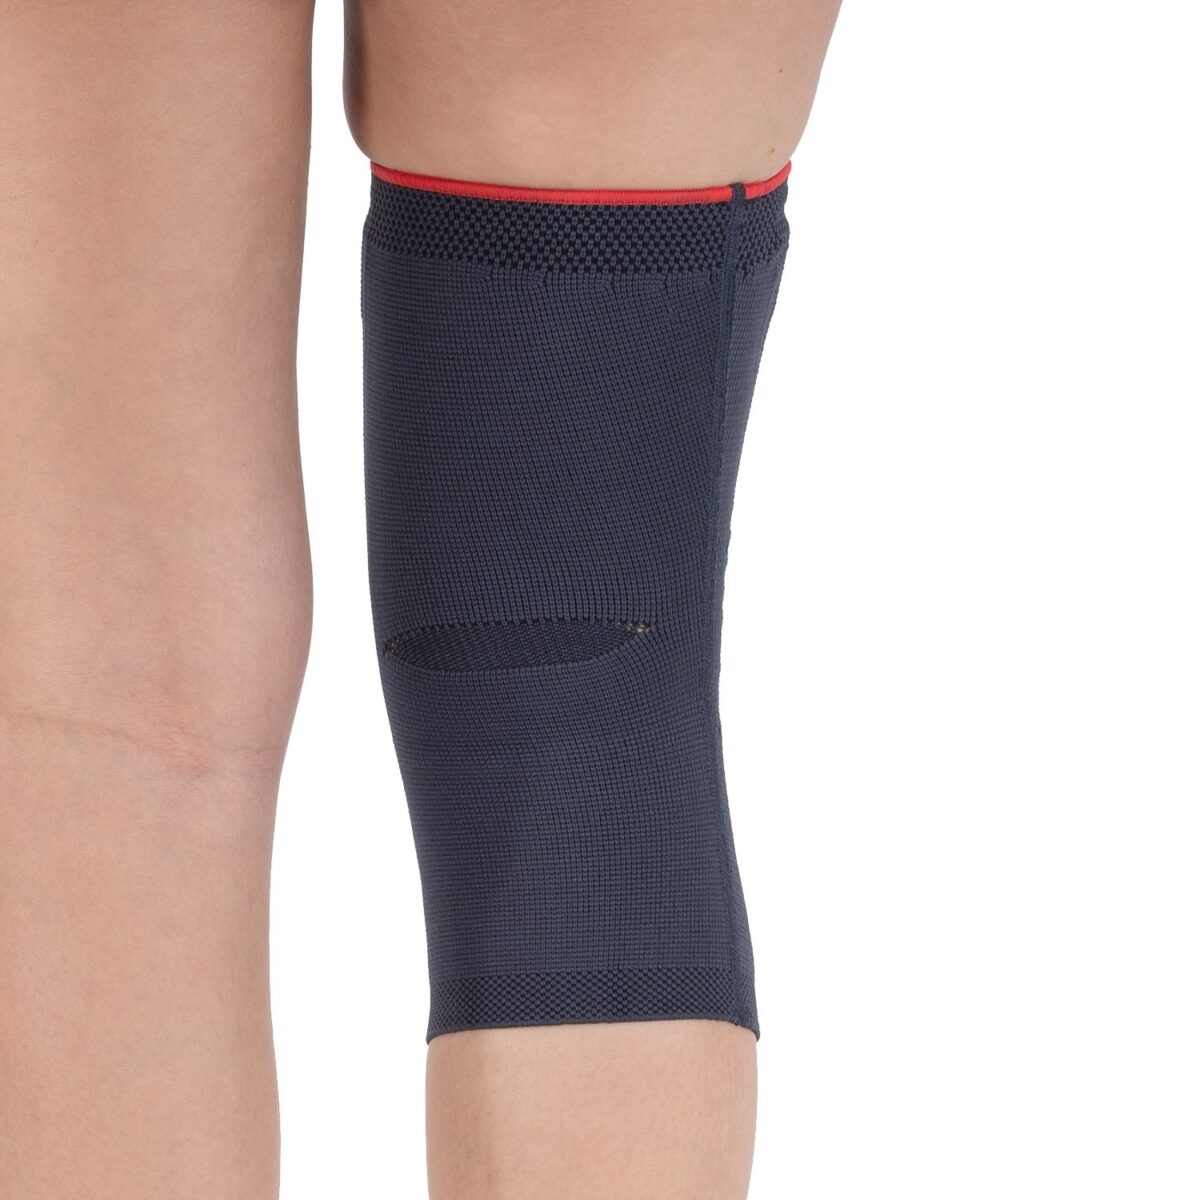 wingmed orthopedic equipments W506 woven patella and ligament knee support 70